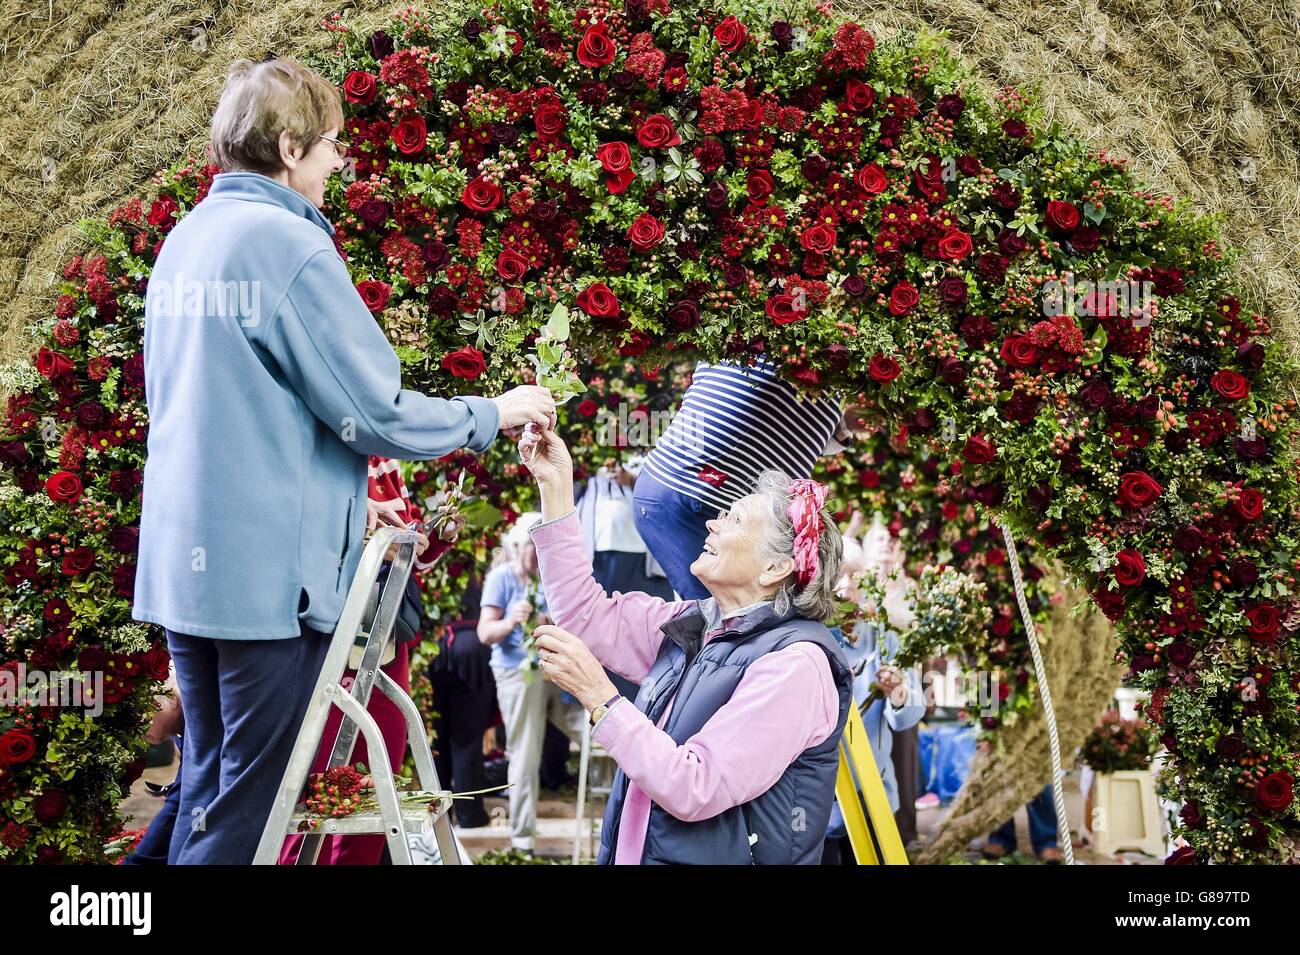 Women add red roses and other flora and fauna to a sculpture inside Salisbury Cathedral in the Magna Flora Flower Festival, which sees 500 flower arrangers take part creating a huge display inspired by the Magna Carta, featuring 30,000 blooms. Stock Photo